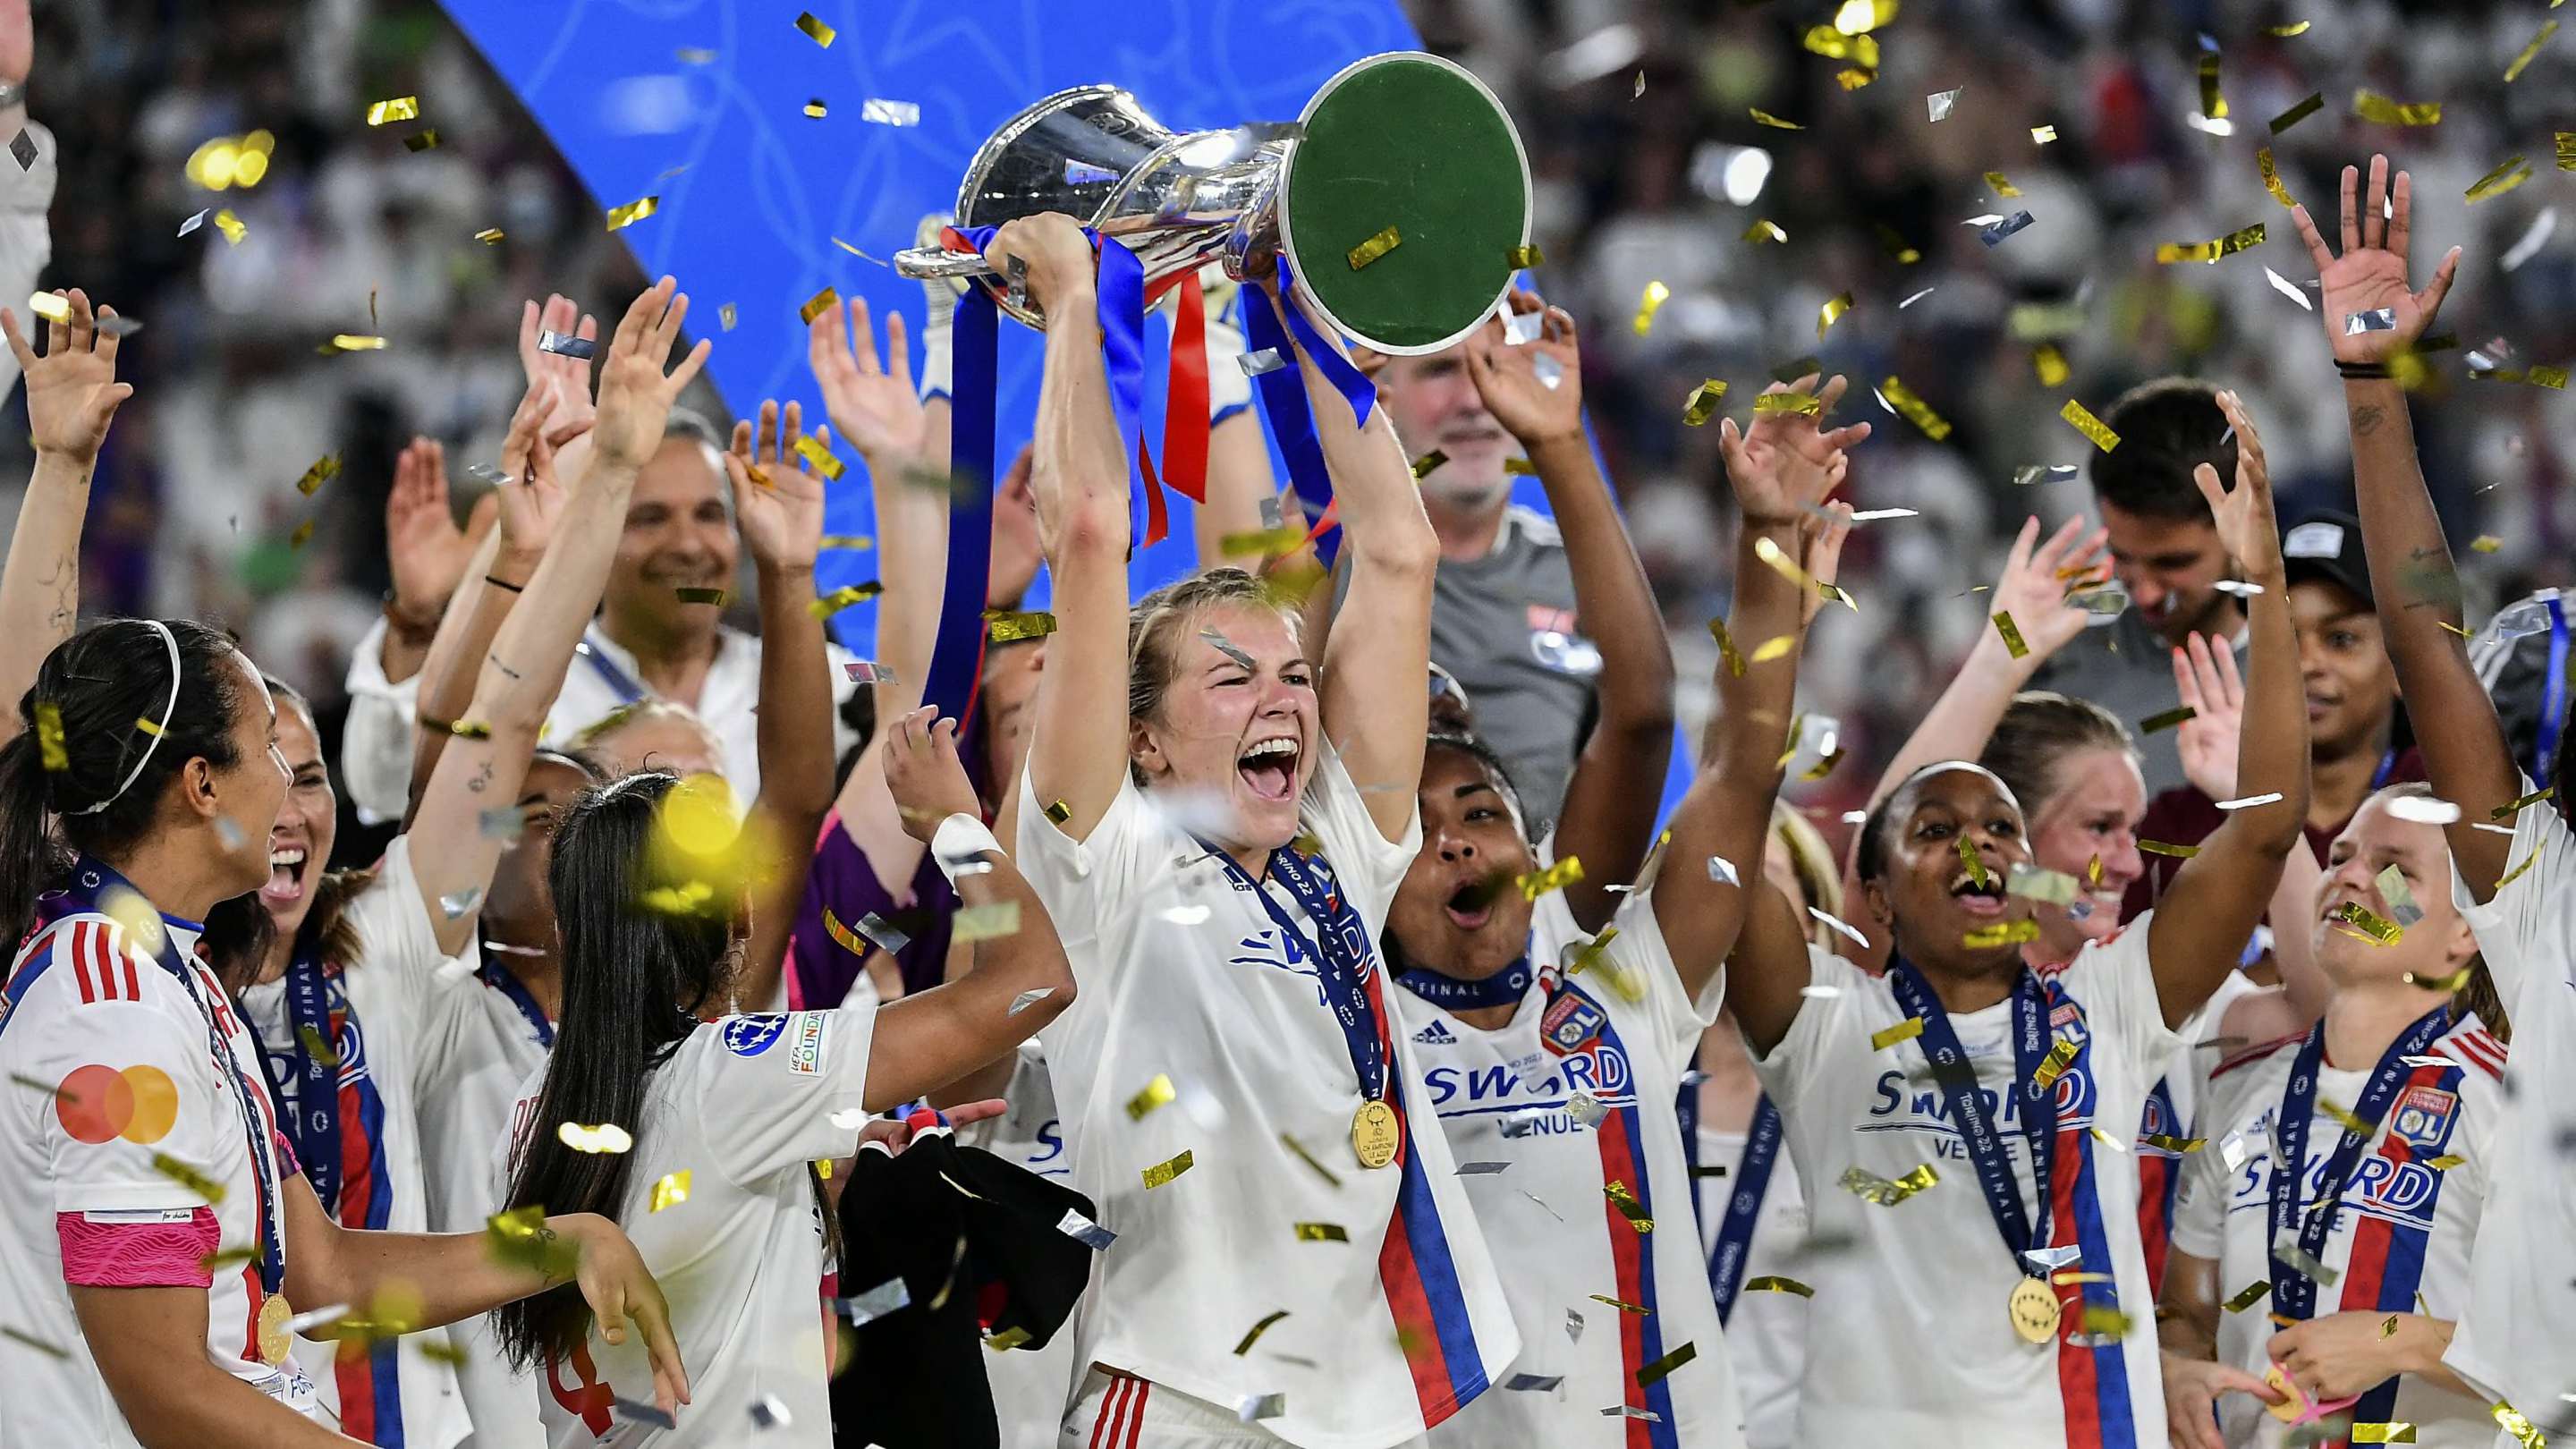 Women's Champions League final watched by 3.6m viewers 